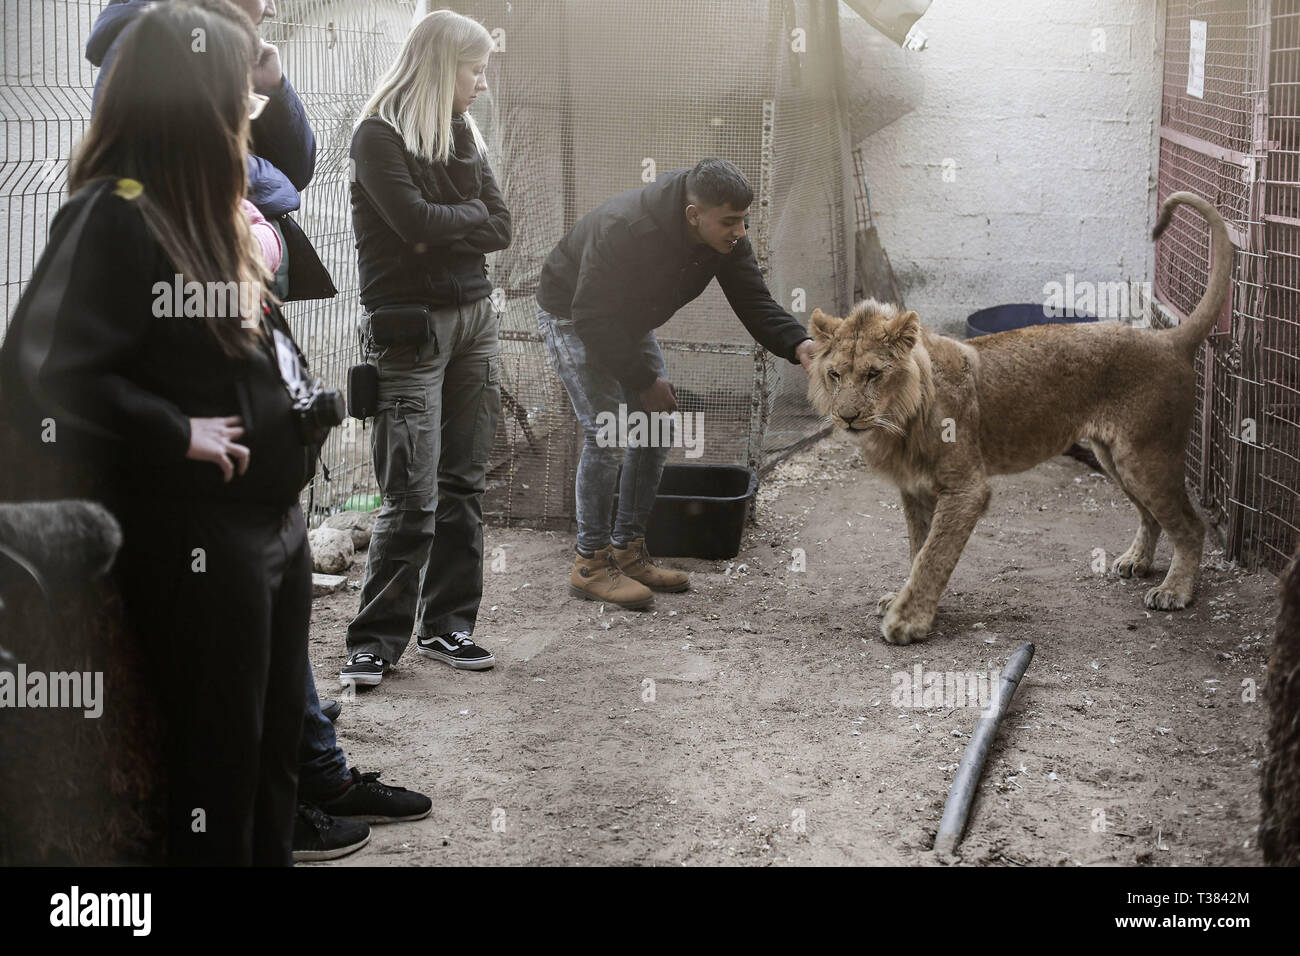 Rafah, Palestinian Territories. 07th Apr, 2019. A member of the International  Animal Welfare Organization 'Four Paws' tends to a lioness at a zoo in  Rafah, as the zoo owner agreed to handover